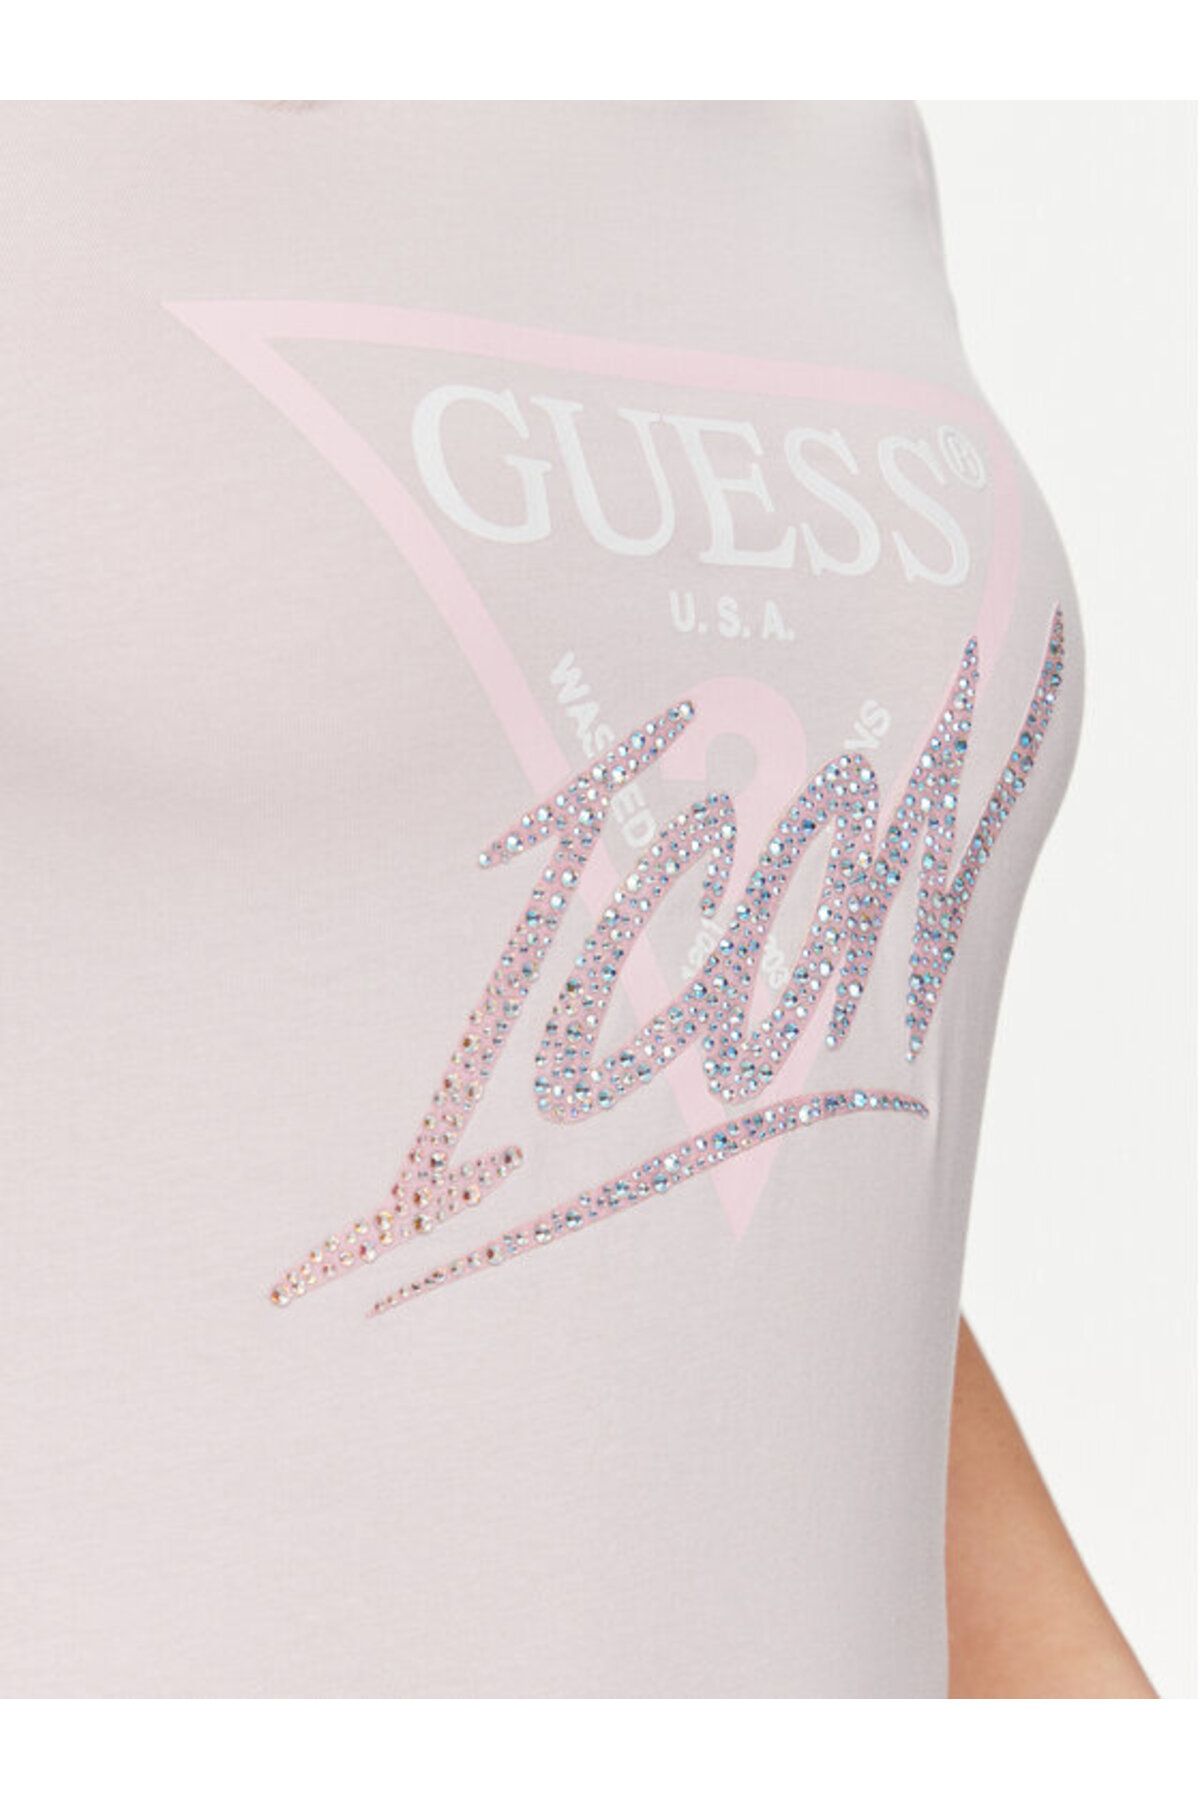 Guess Icon Tee Women Slim Fit تی شرت